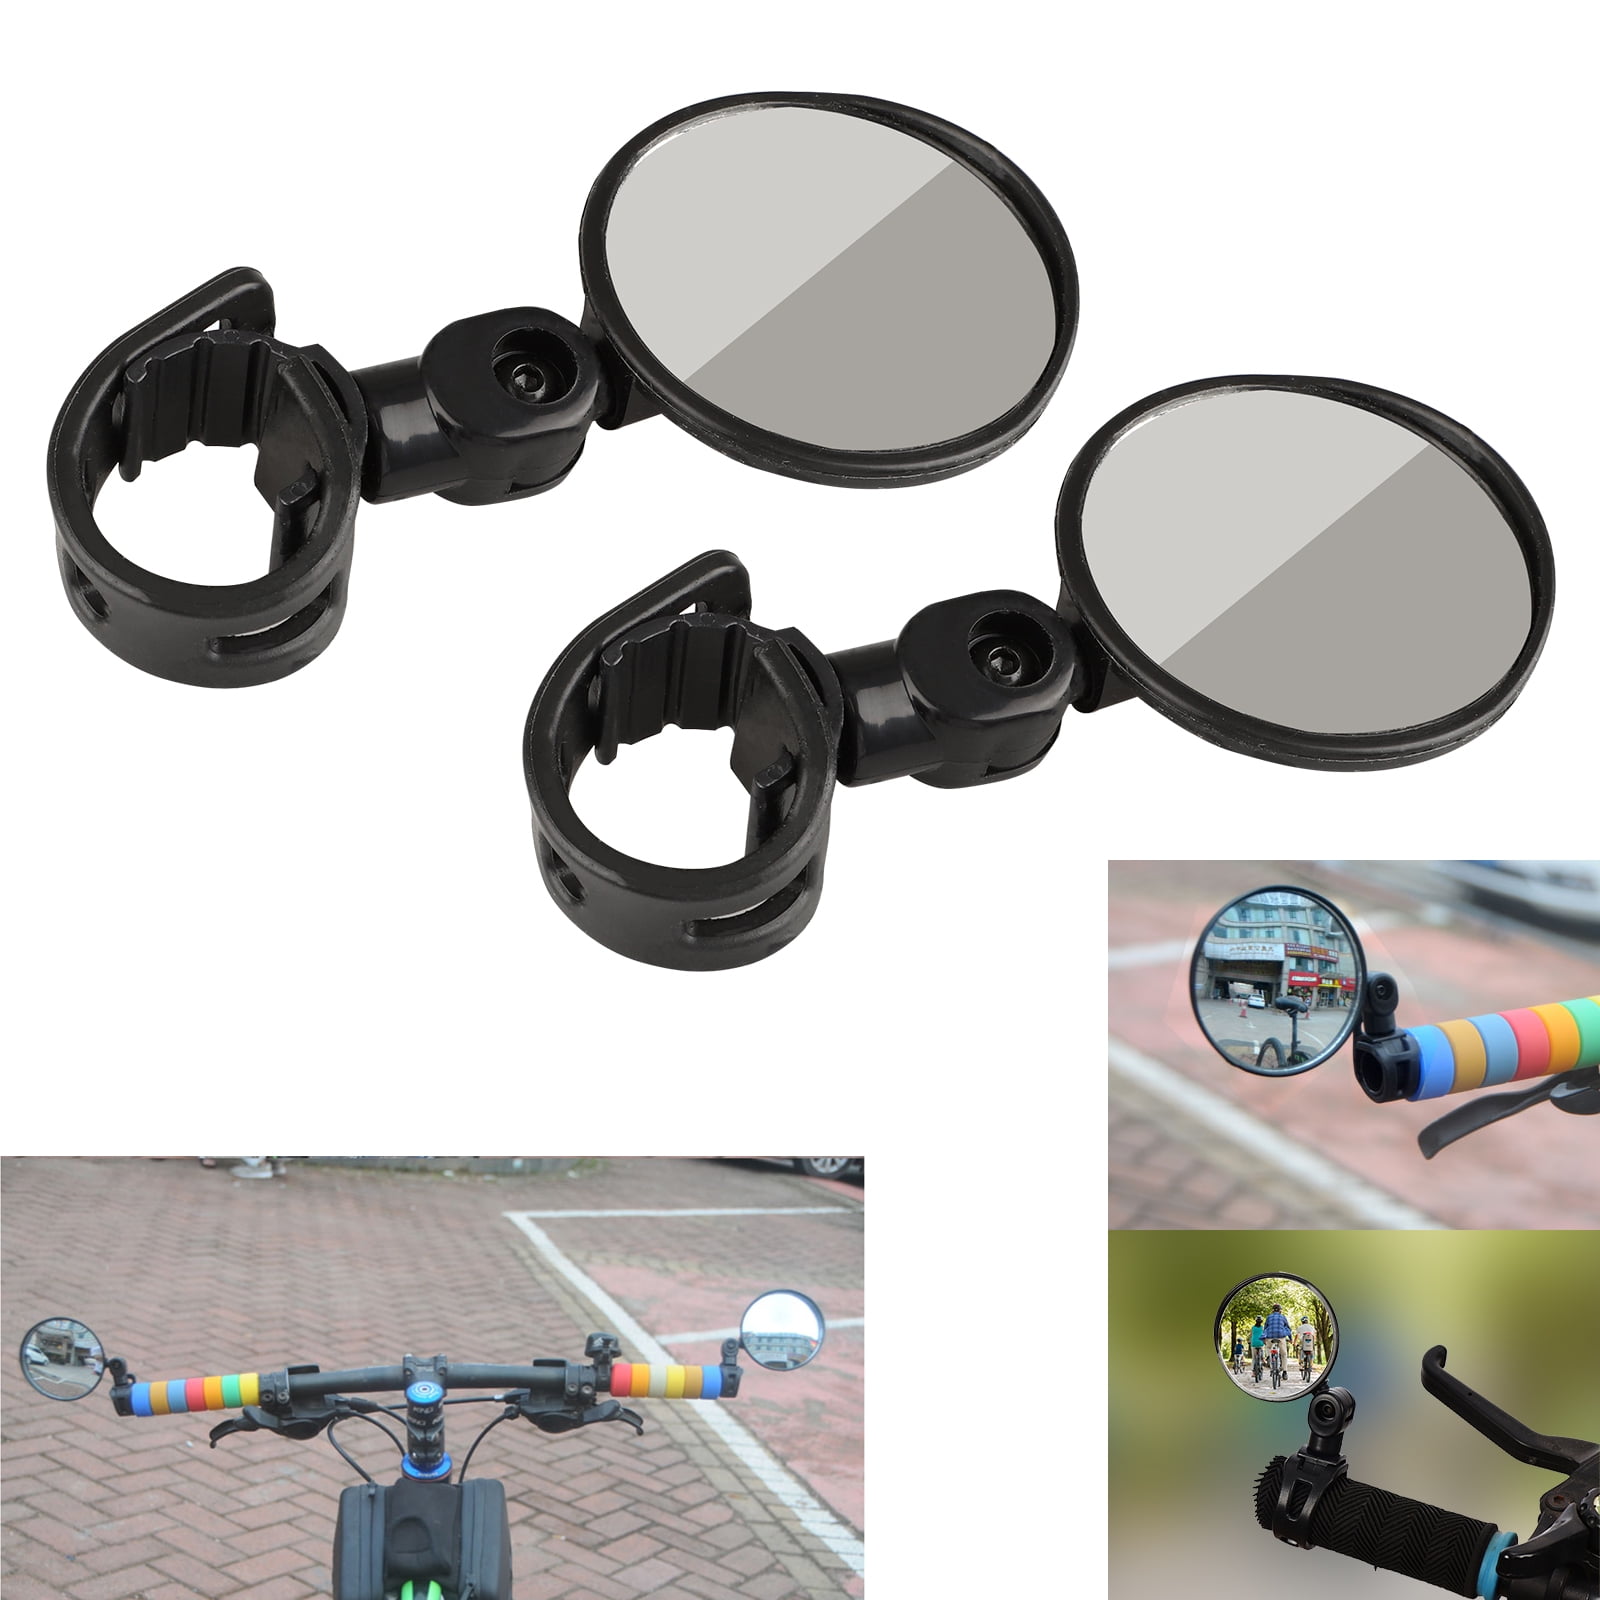 Bell The Original SmartView 300 Wide Angle Bike Mirror for sale online